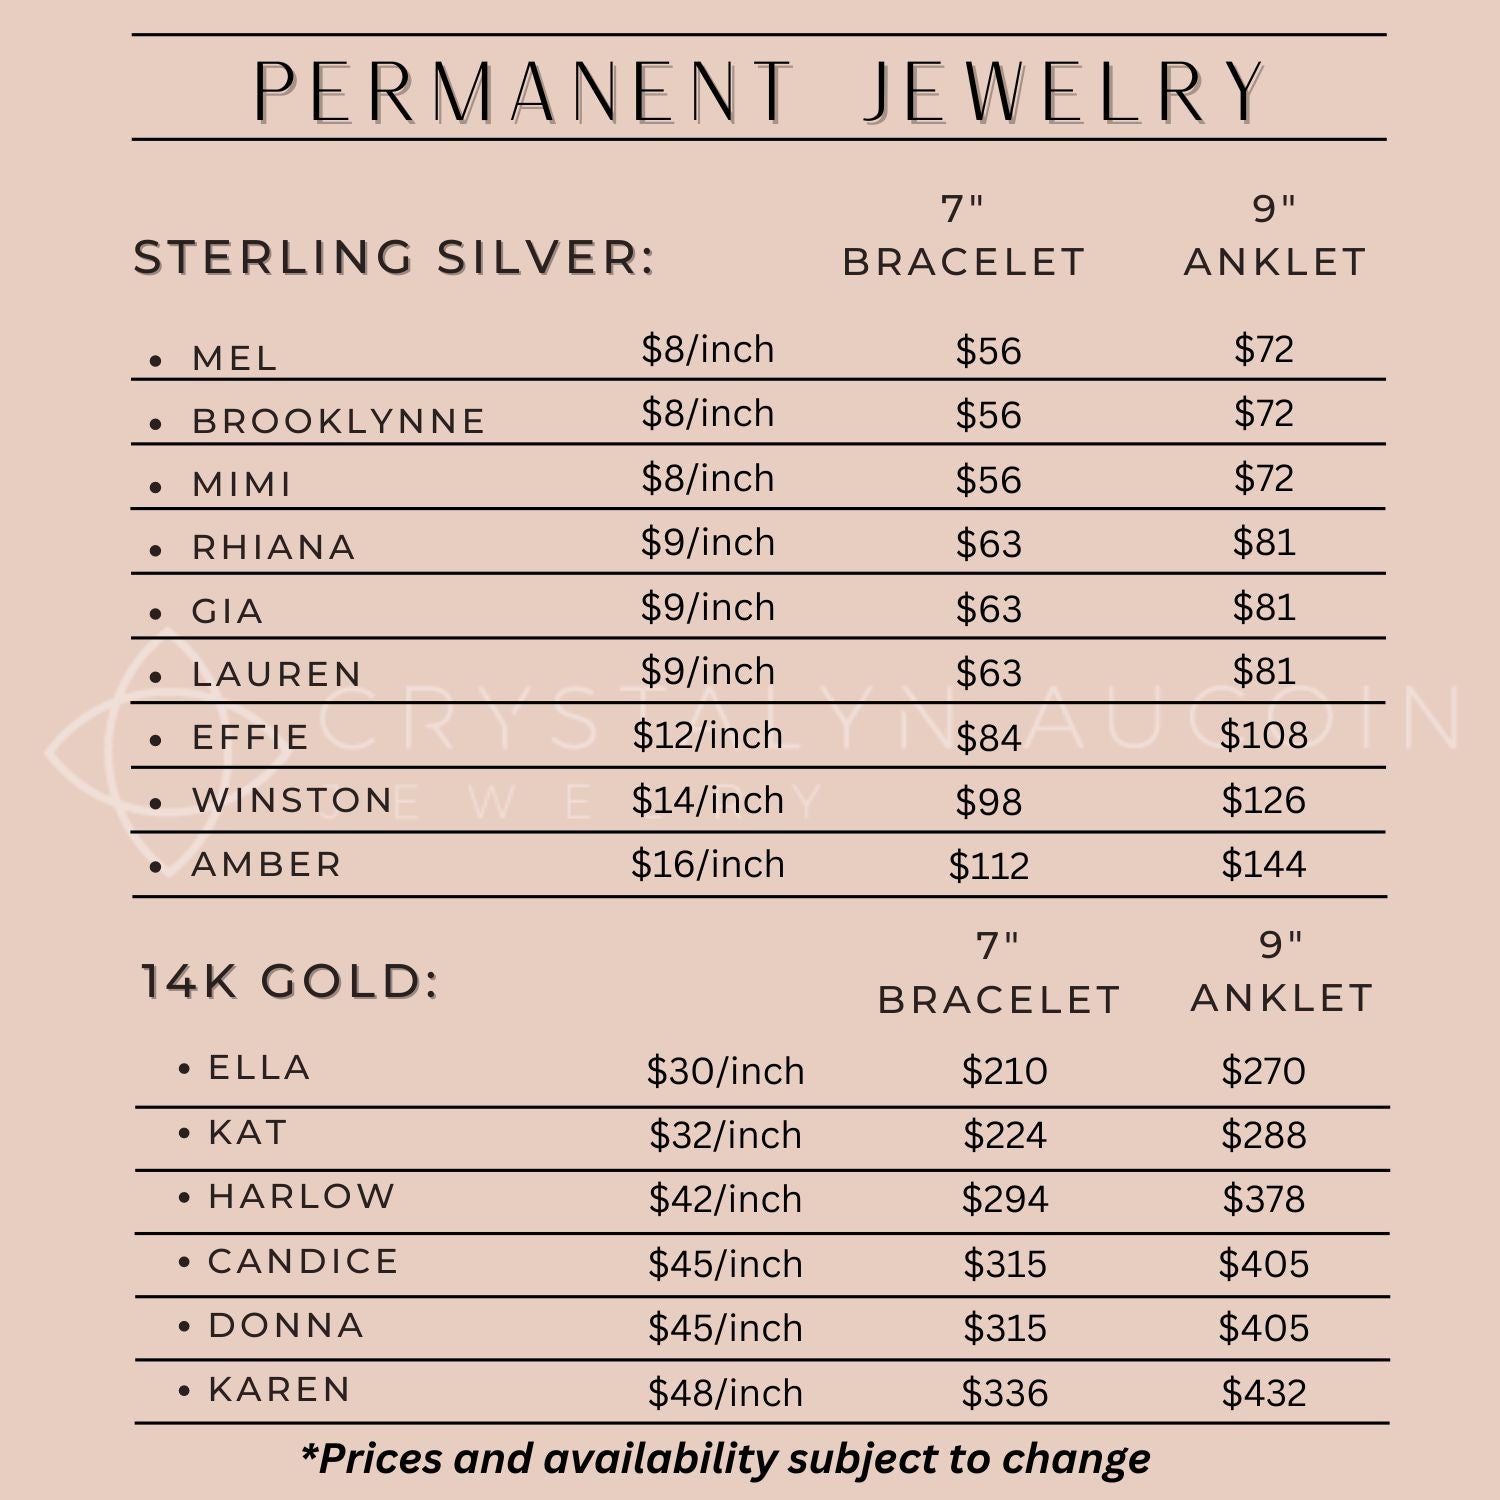 Permanent Jewelry By Appointment